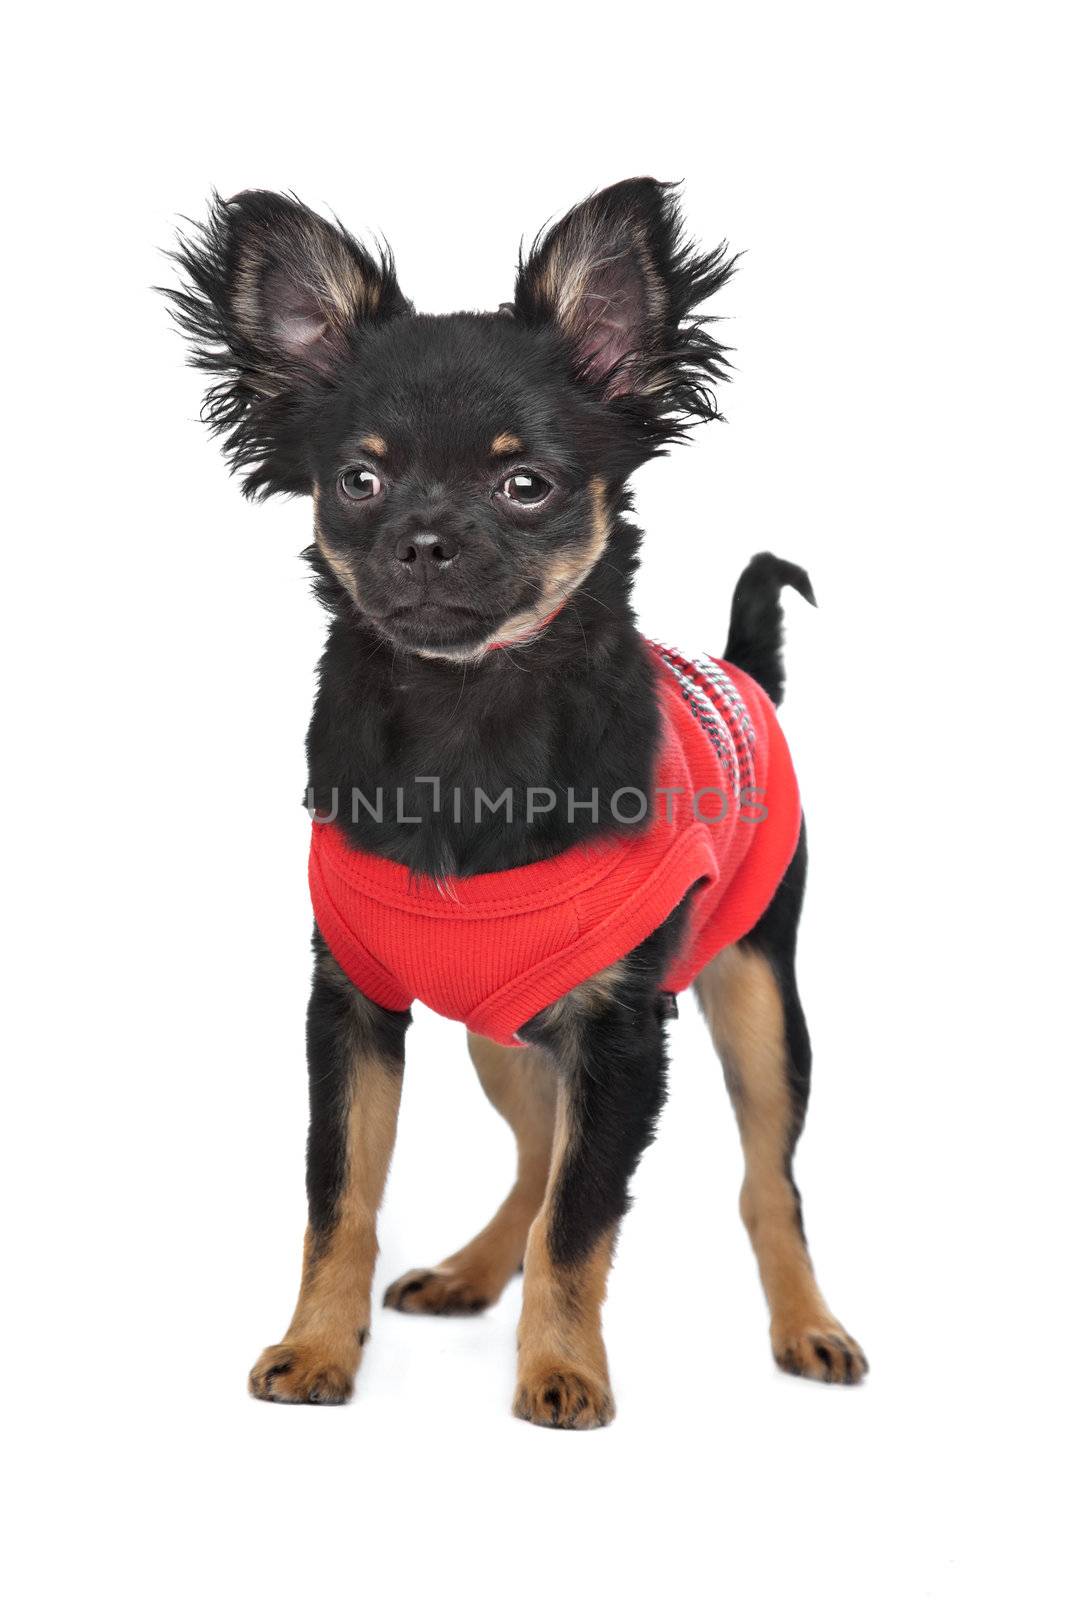 chihuahua with red shirt in front of a white background